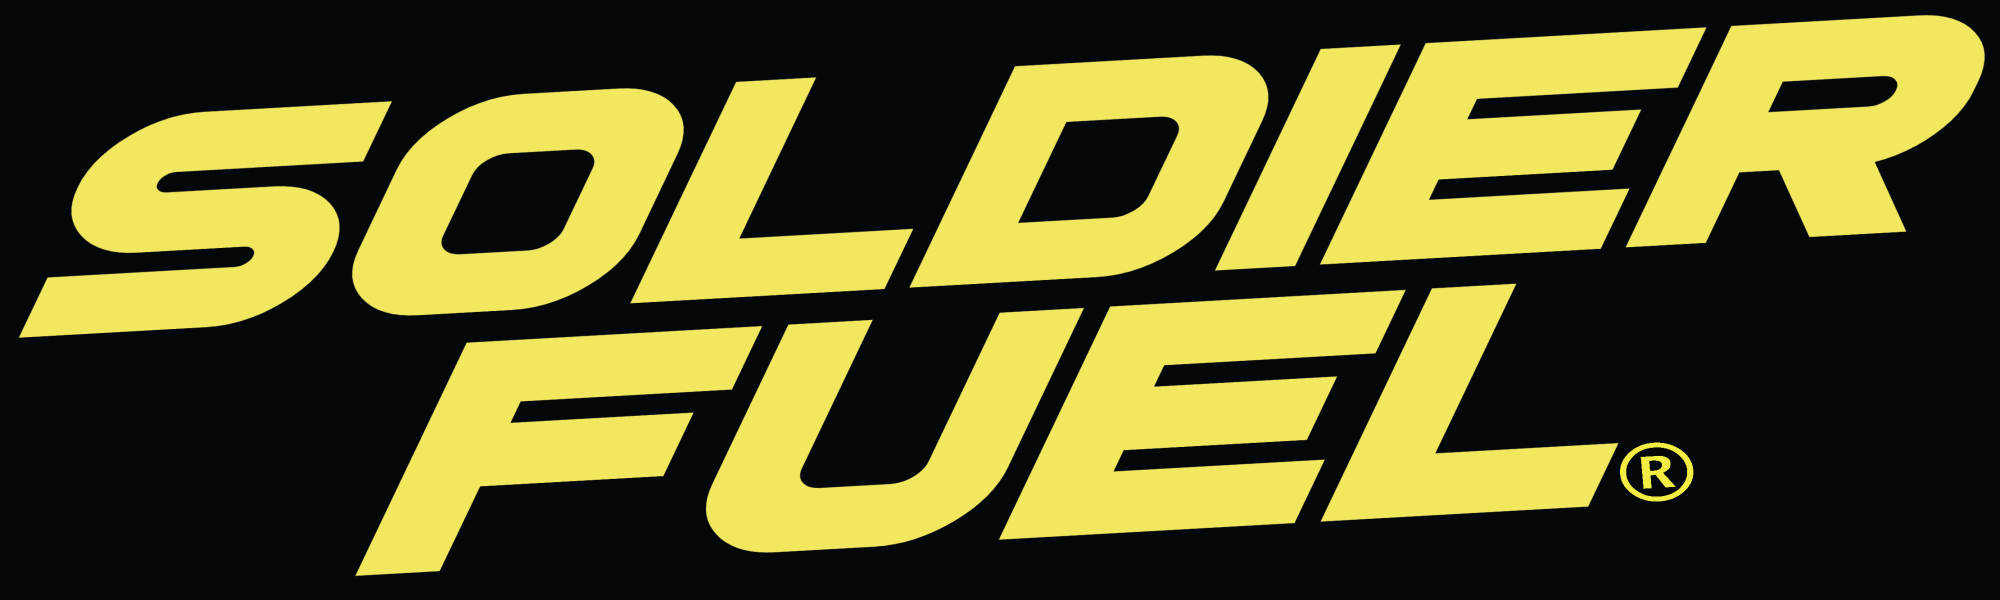 BEL_Soldier Fuel - yellow on black SF logo.png